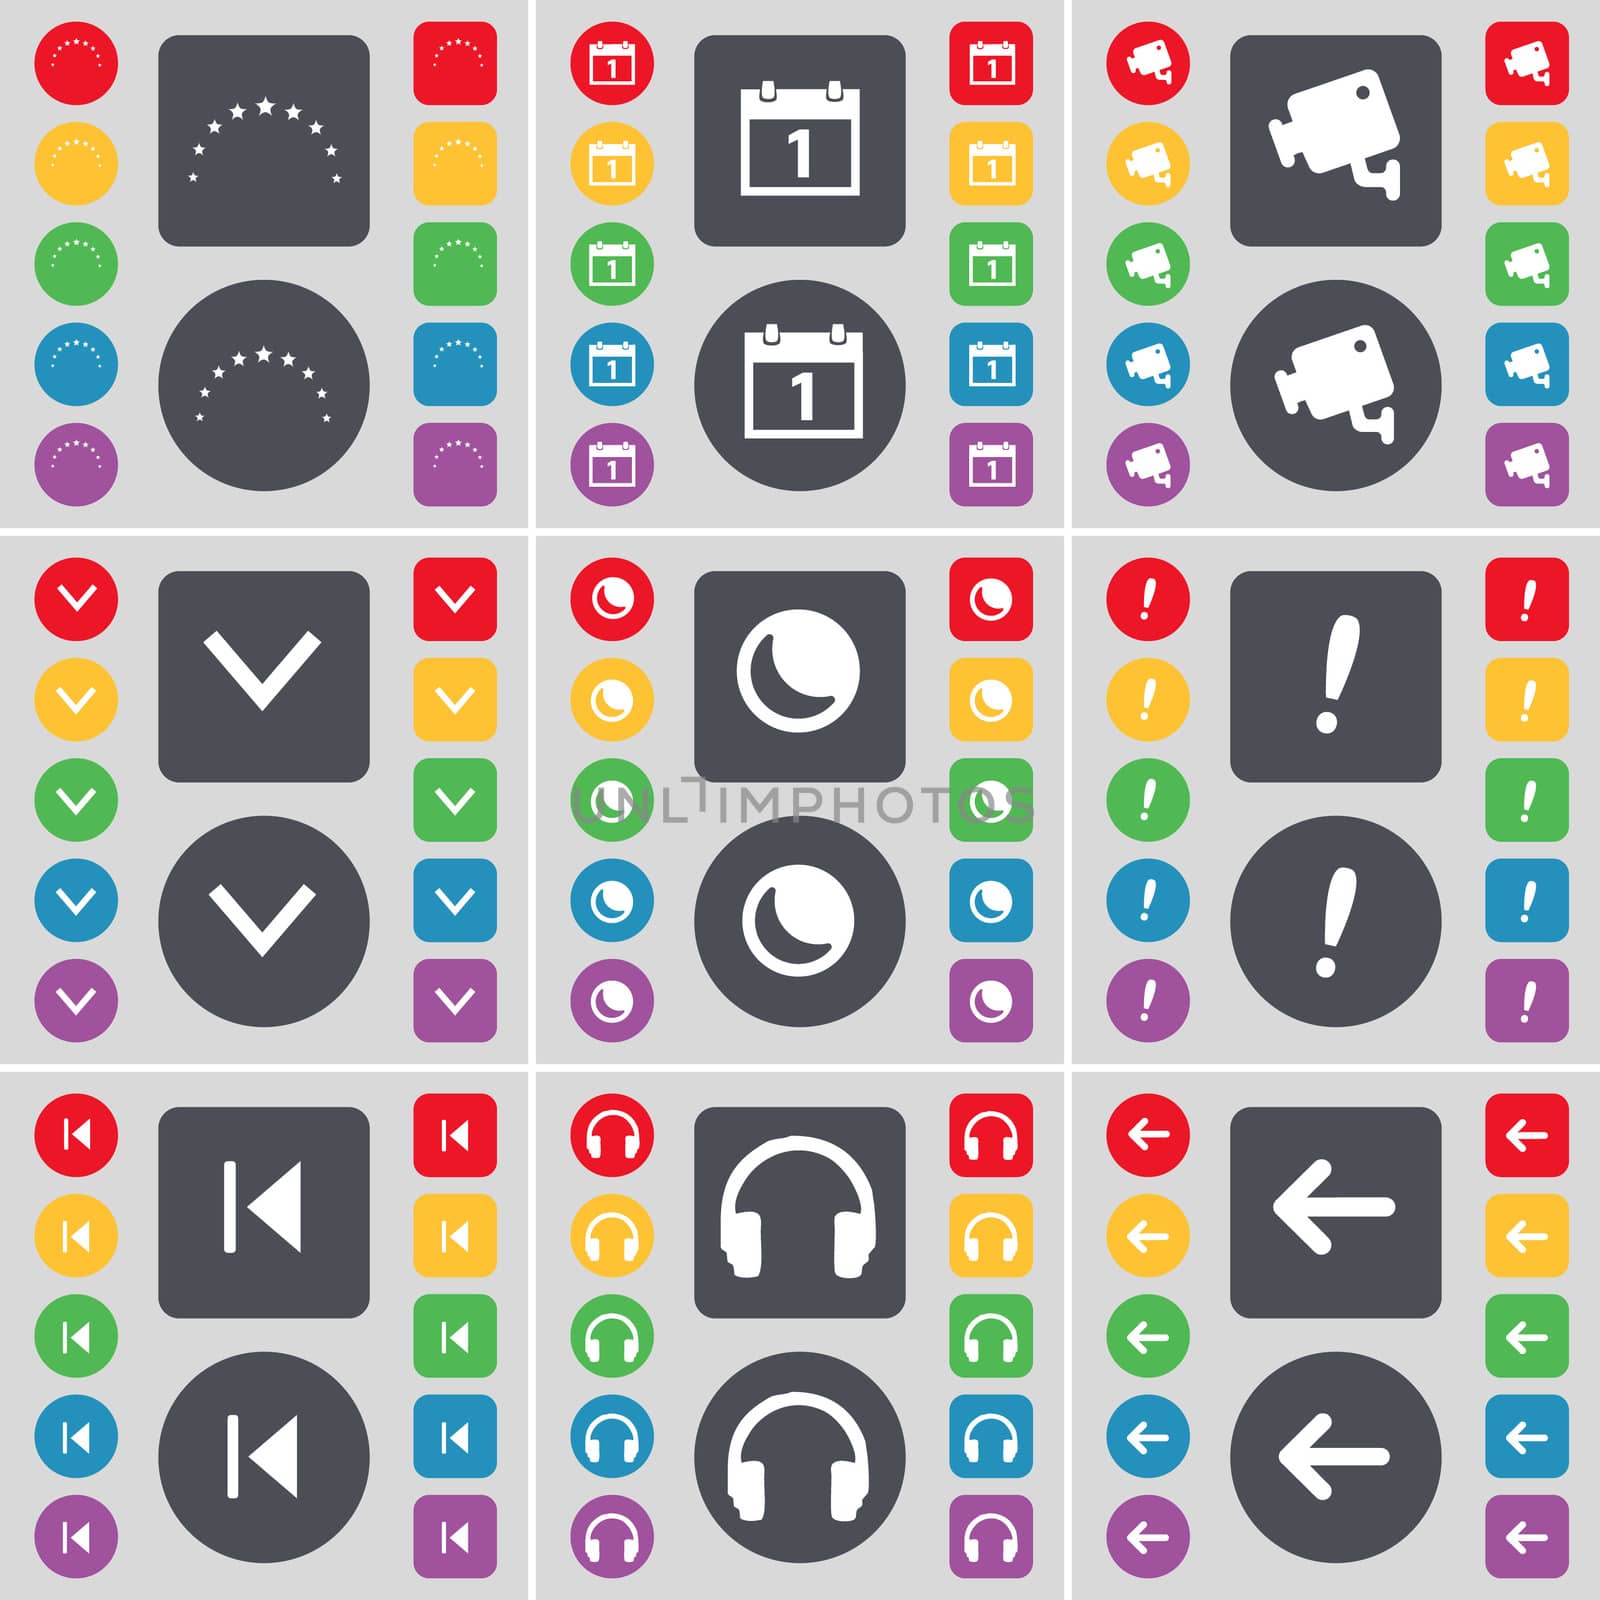 Star, Calendar, CCTV, Arrow down, Moon, Exclamation mark, Media skip, Headphones, Arrow left icon symbol. A large set of flat, colored buttons for your design. illustration